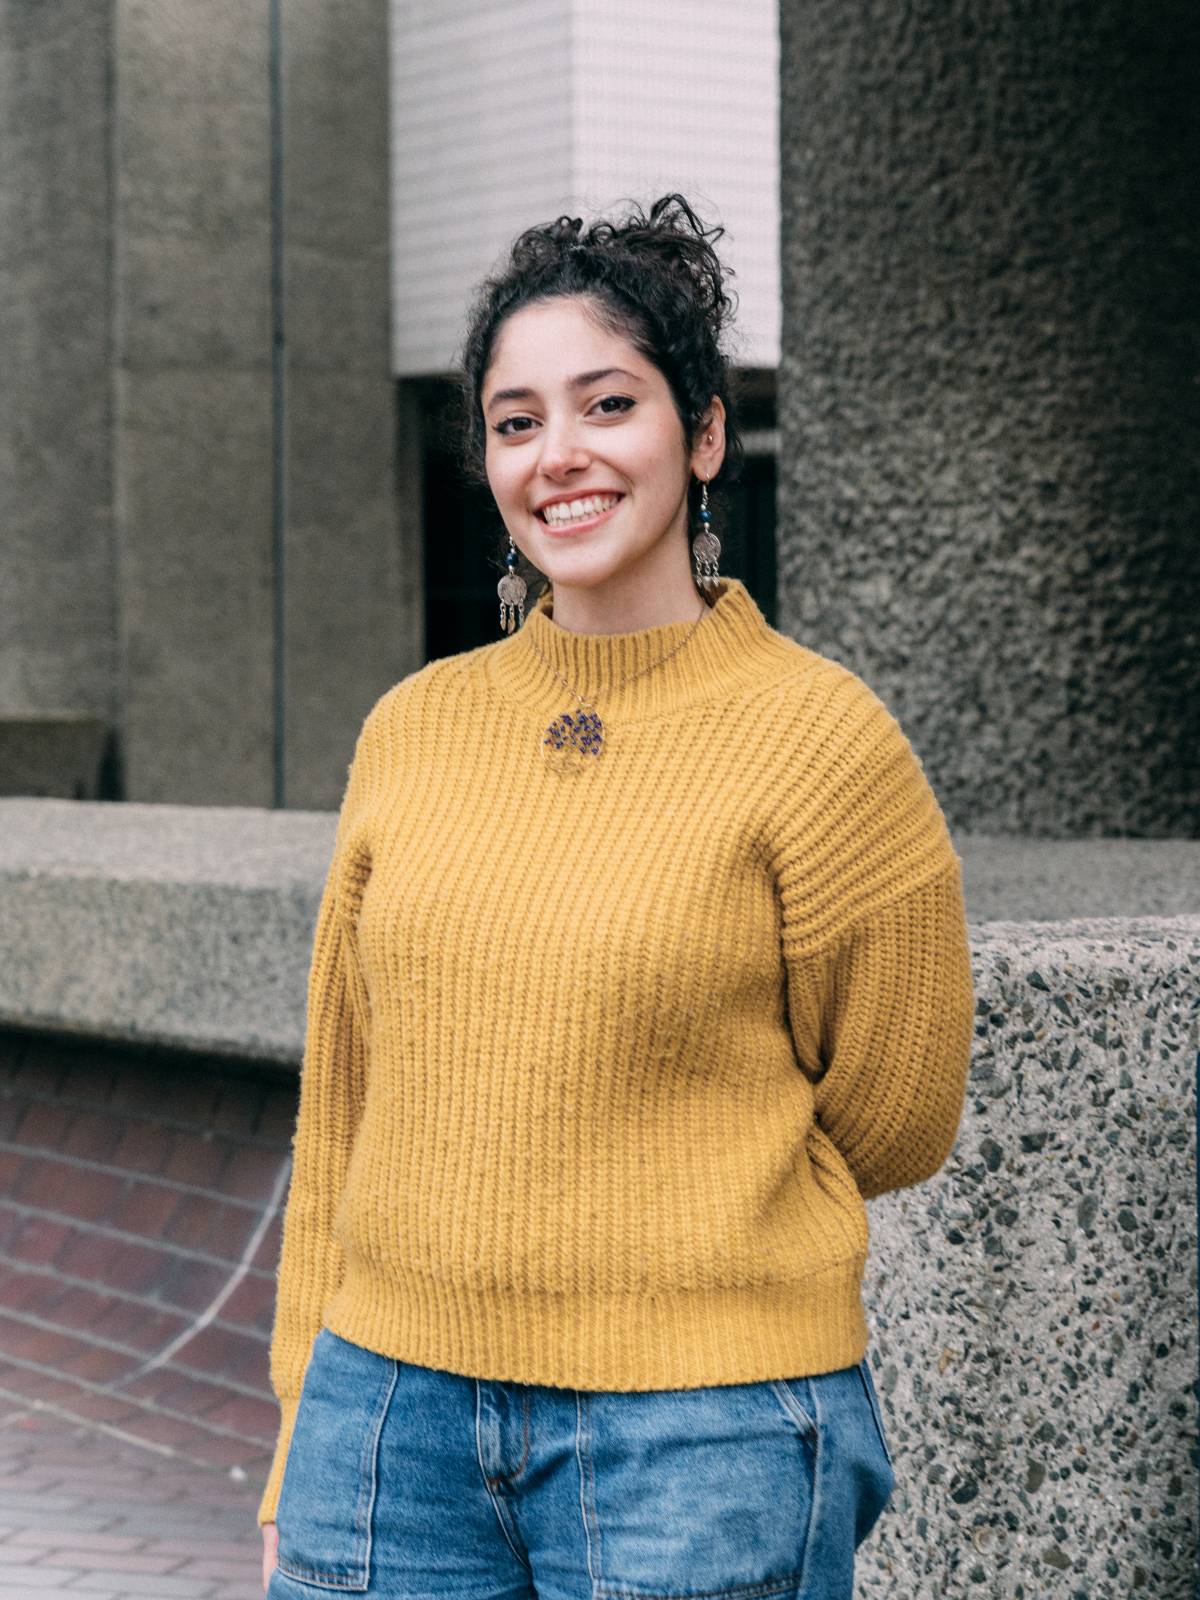 A photo of Riwa smiling and wearing a mustard-yellow sweater.